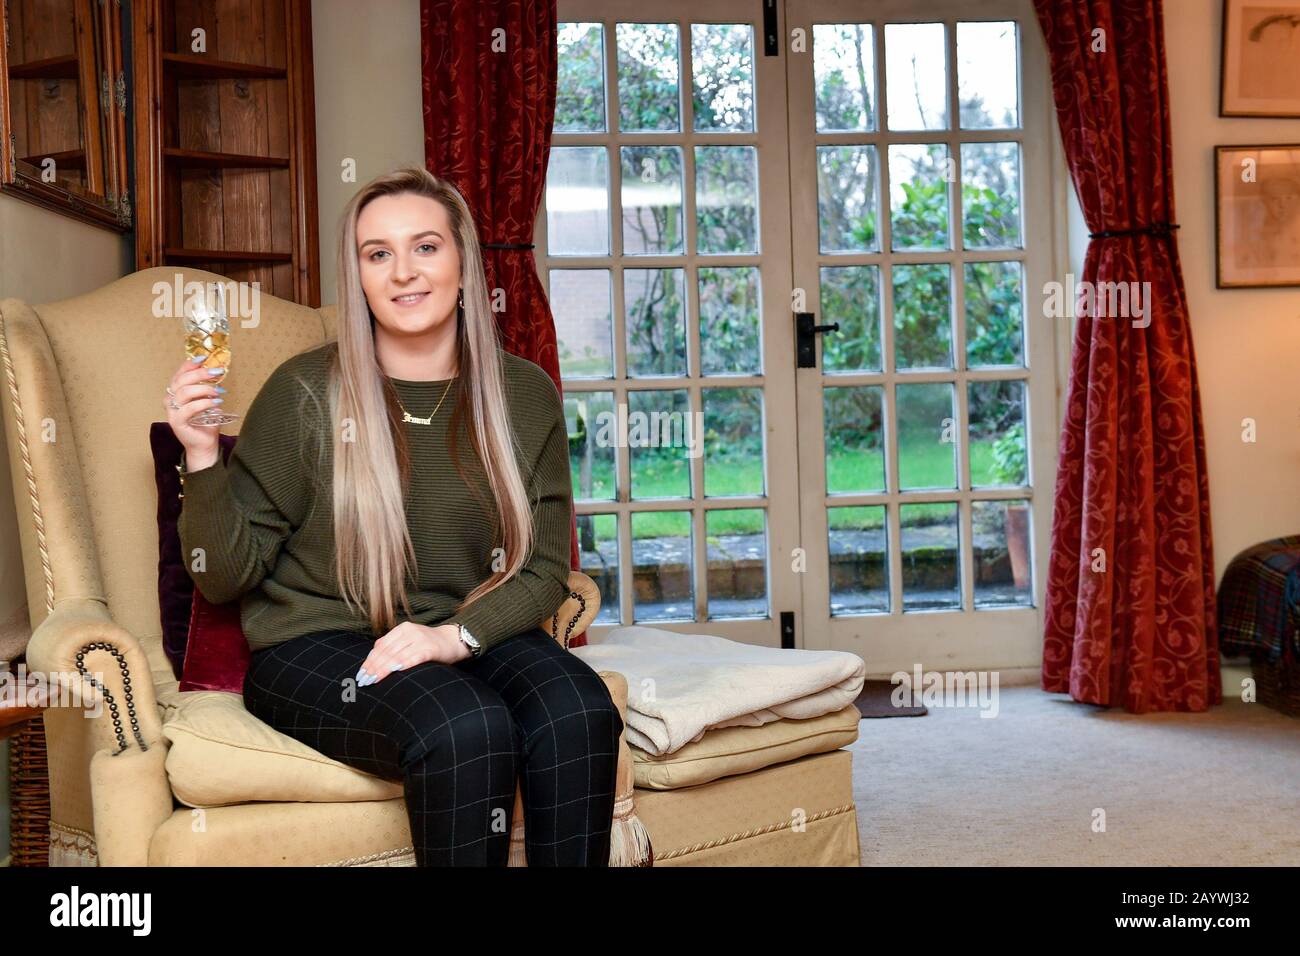 Jemma Nicklin, 23, during her first visit to Shrubbery Farm in Longnor near Shrewsbury, a 300-year-old four bedroom farmhouse which she won after buying two £2 tickets in a raffle organised by owner Mike Chatha. Stock Photo